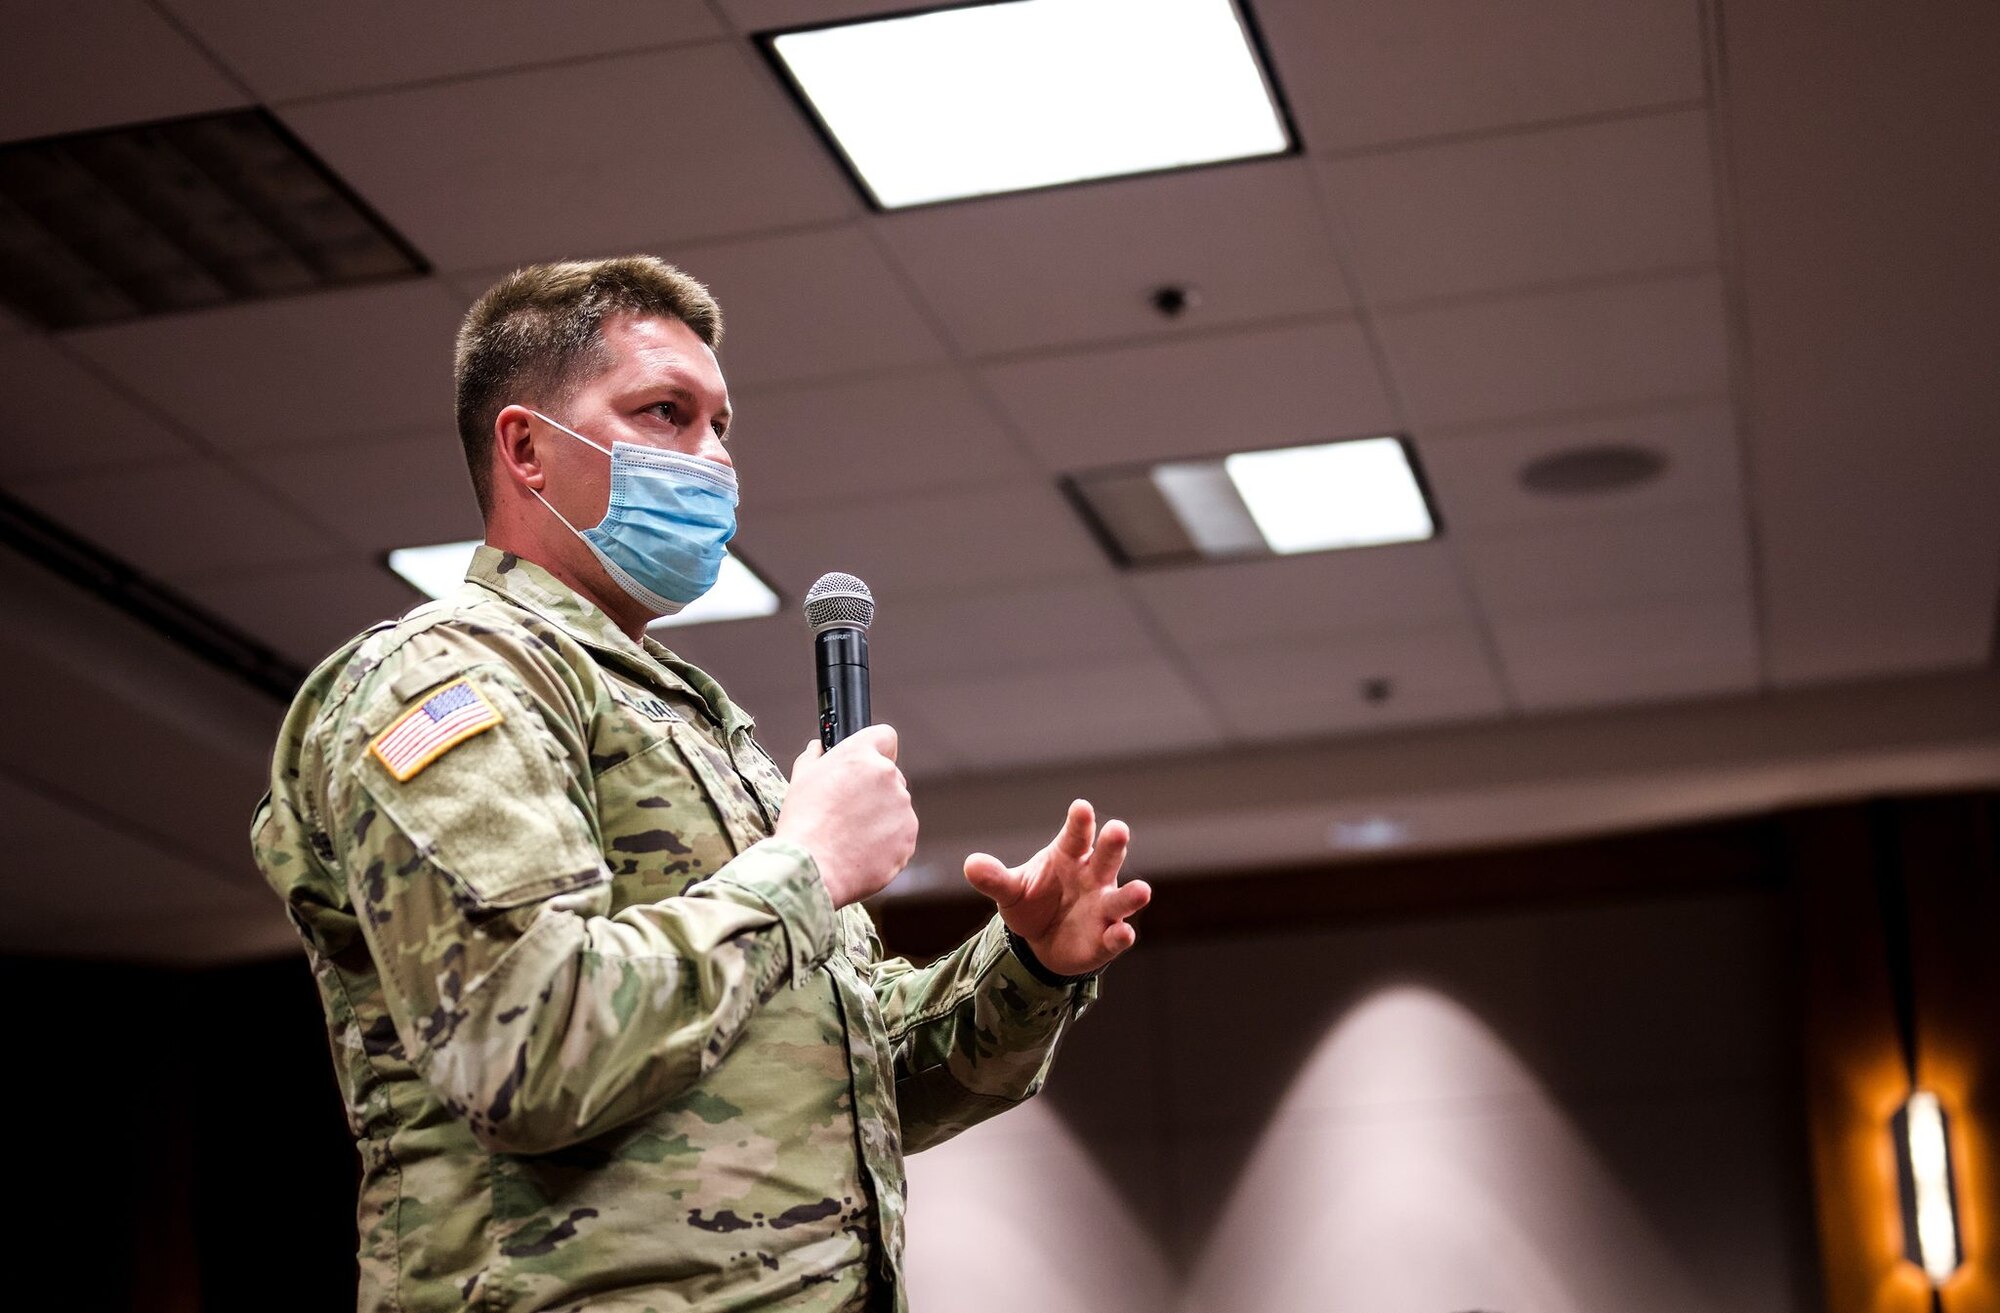 A uniformed service member addresses a crowd with a microphone in a conference room